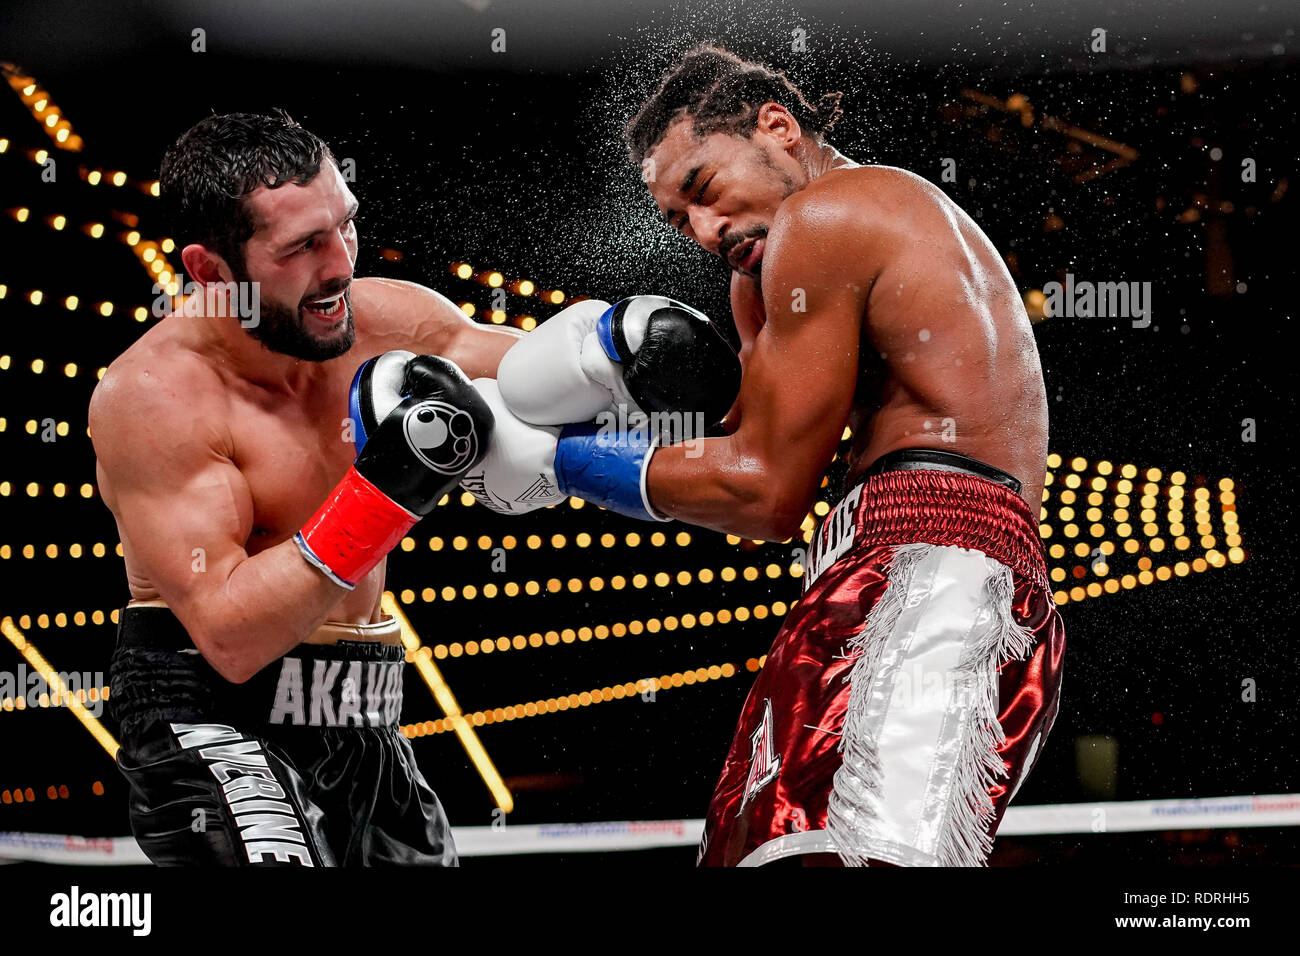 New York, New York, USA. 18th Jan, 2019. DEMETRIUS ANDRADE (burgundy and grey trunks) battles ARTUR AKAVOVIN in a World Boxing Organization World Middleweight Title bout at the Hulu Theater in Madison Square Garden in New York, New York. Credit: Joel Plummer/ZUMA Wire/Alamy Live News Stock Photo